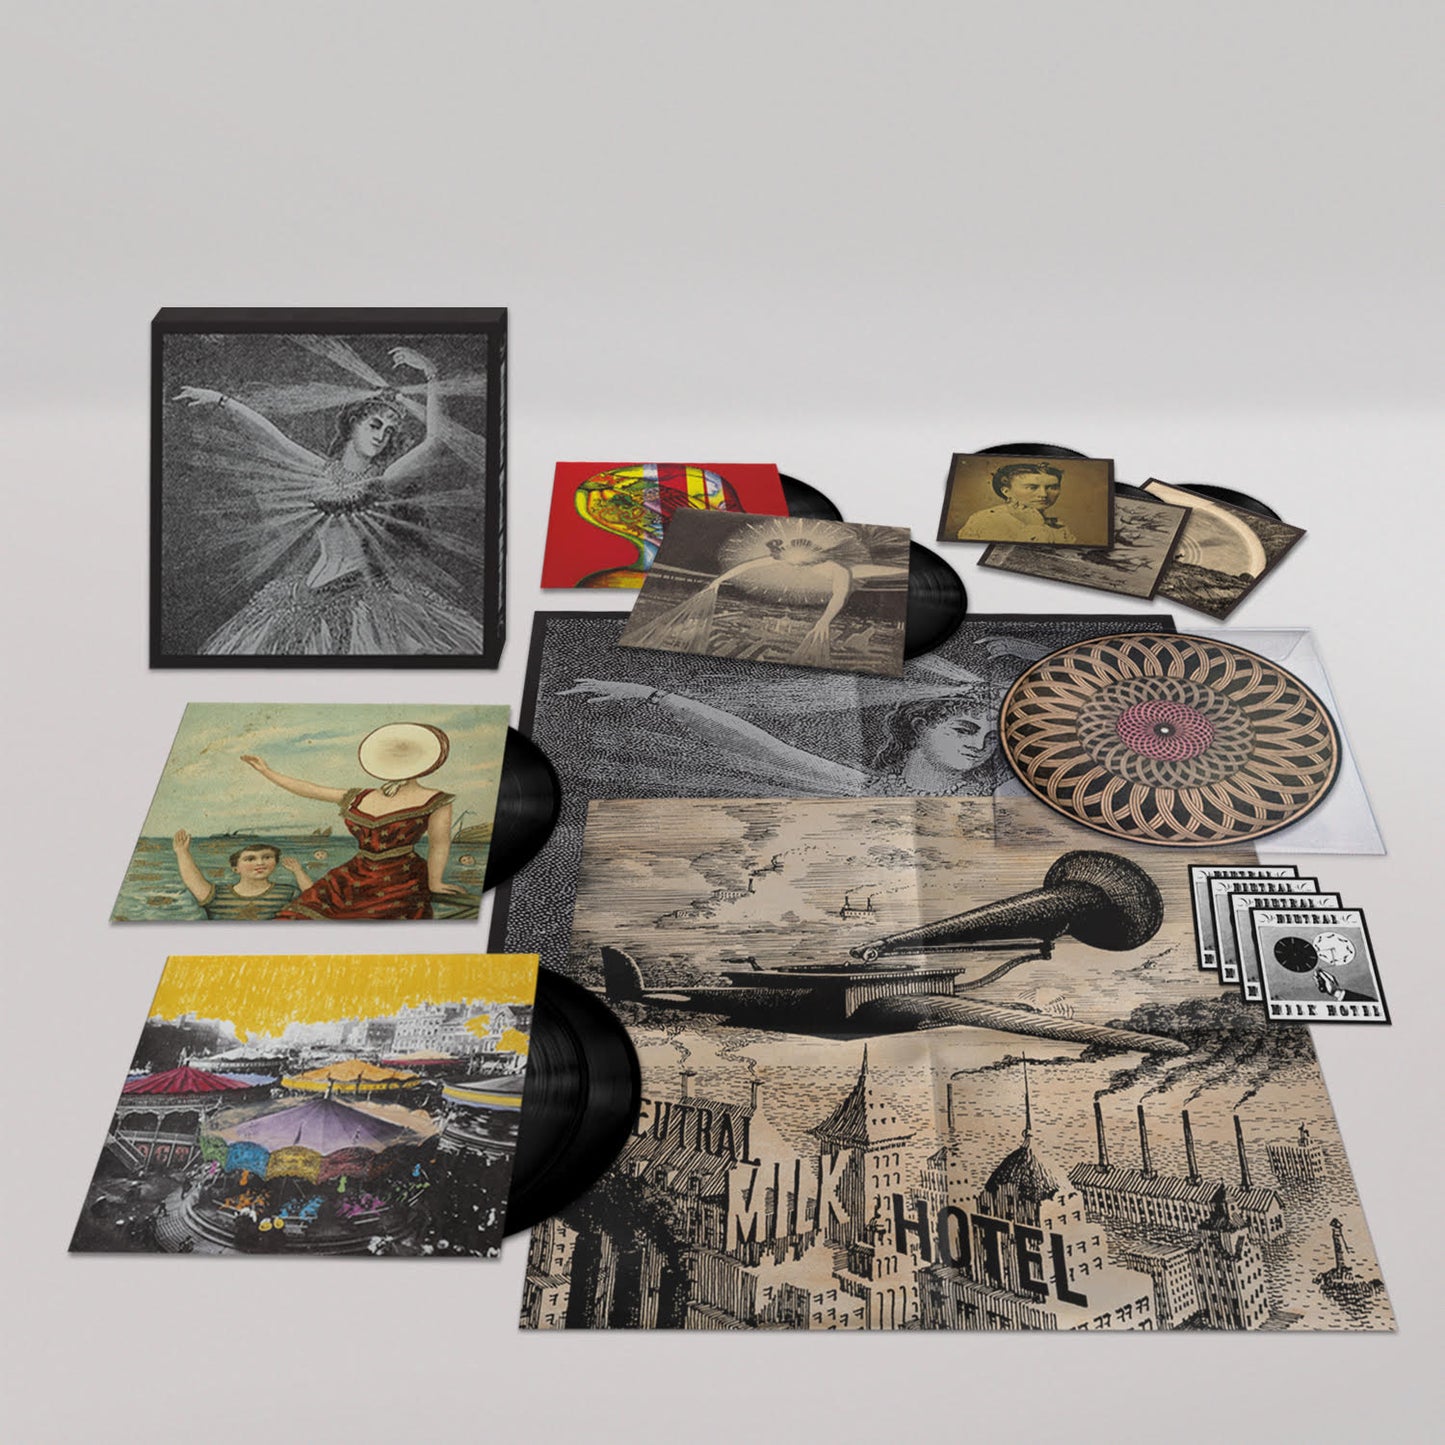 Neutral Milk Hotel - The Collected Works of Neutral Milk Hotel LP BOX